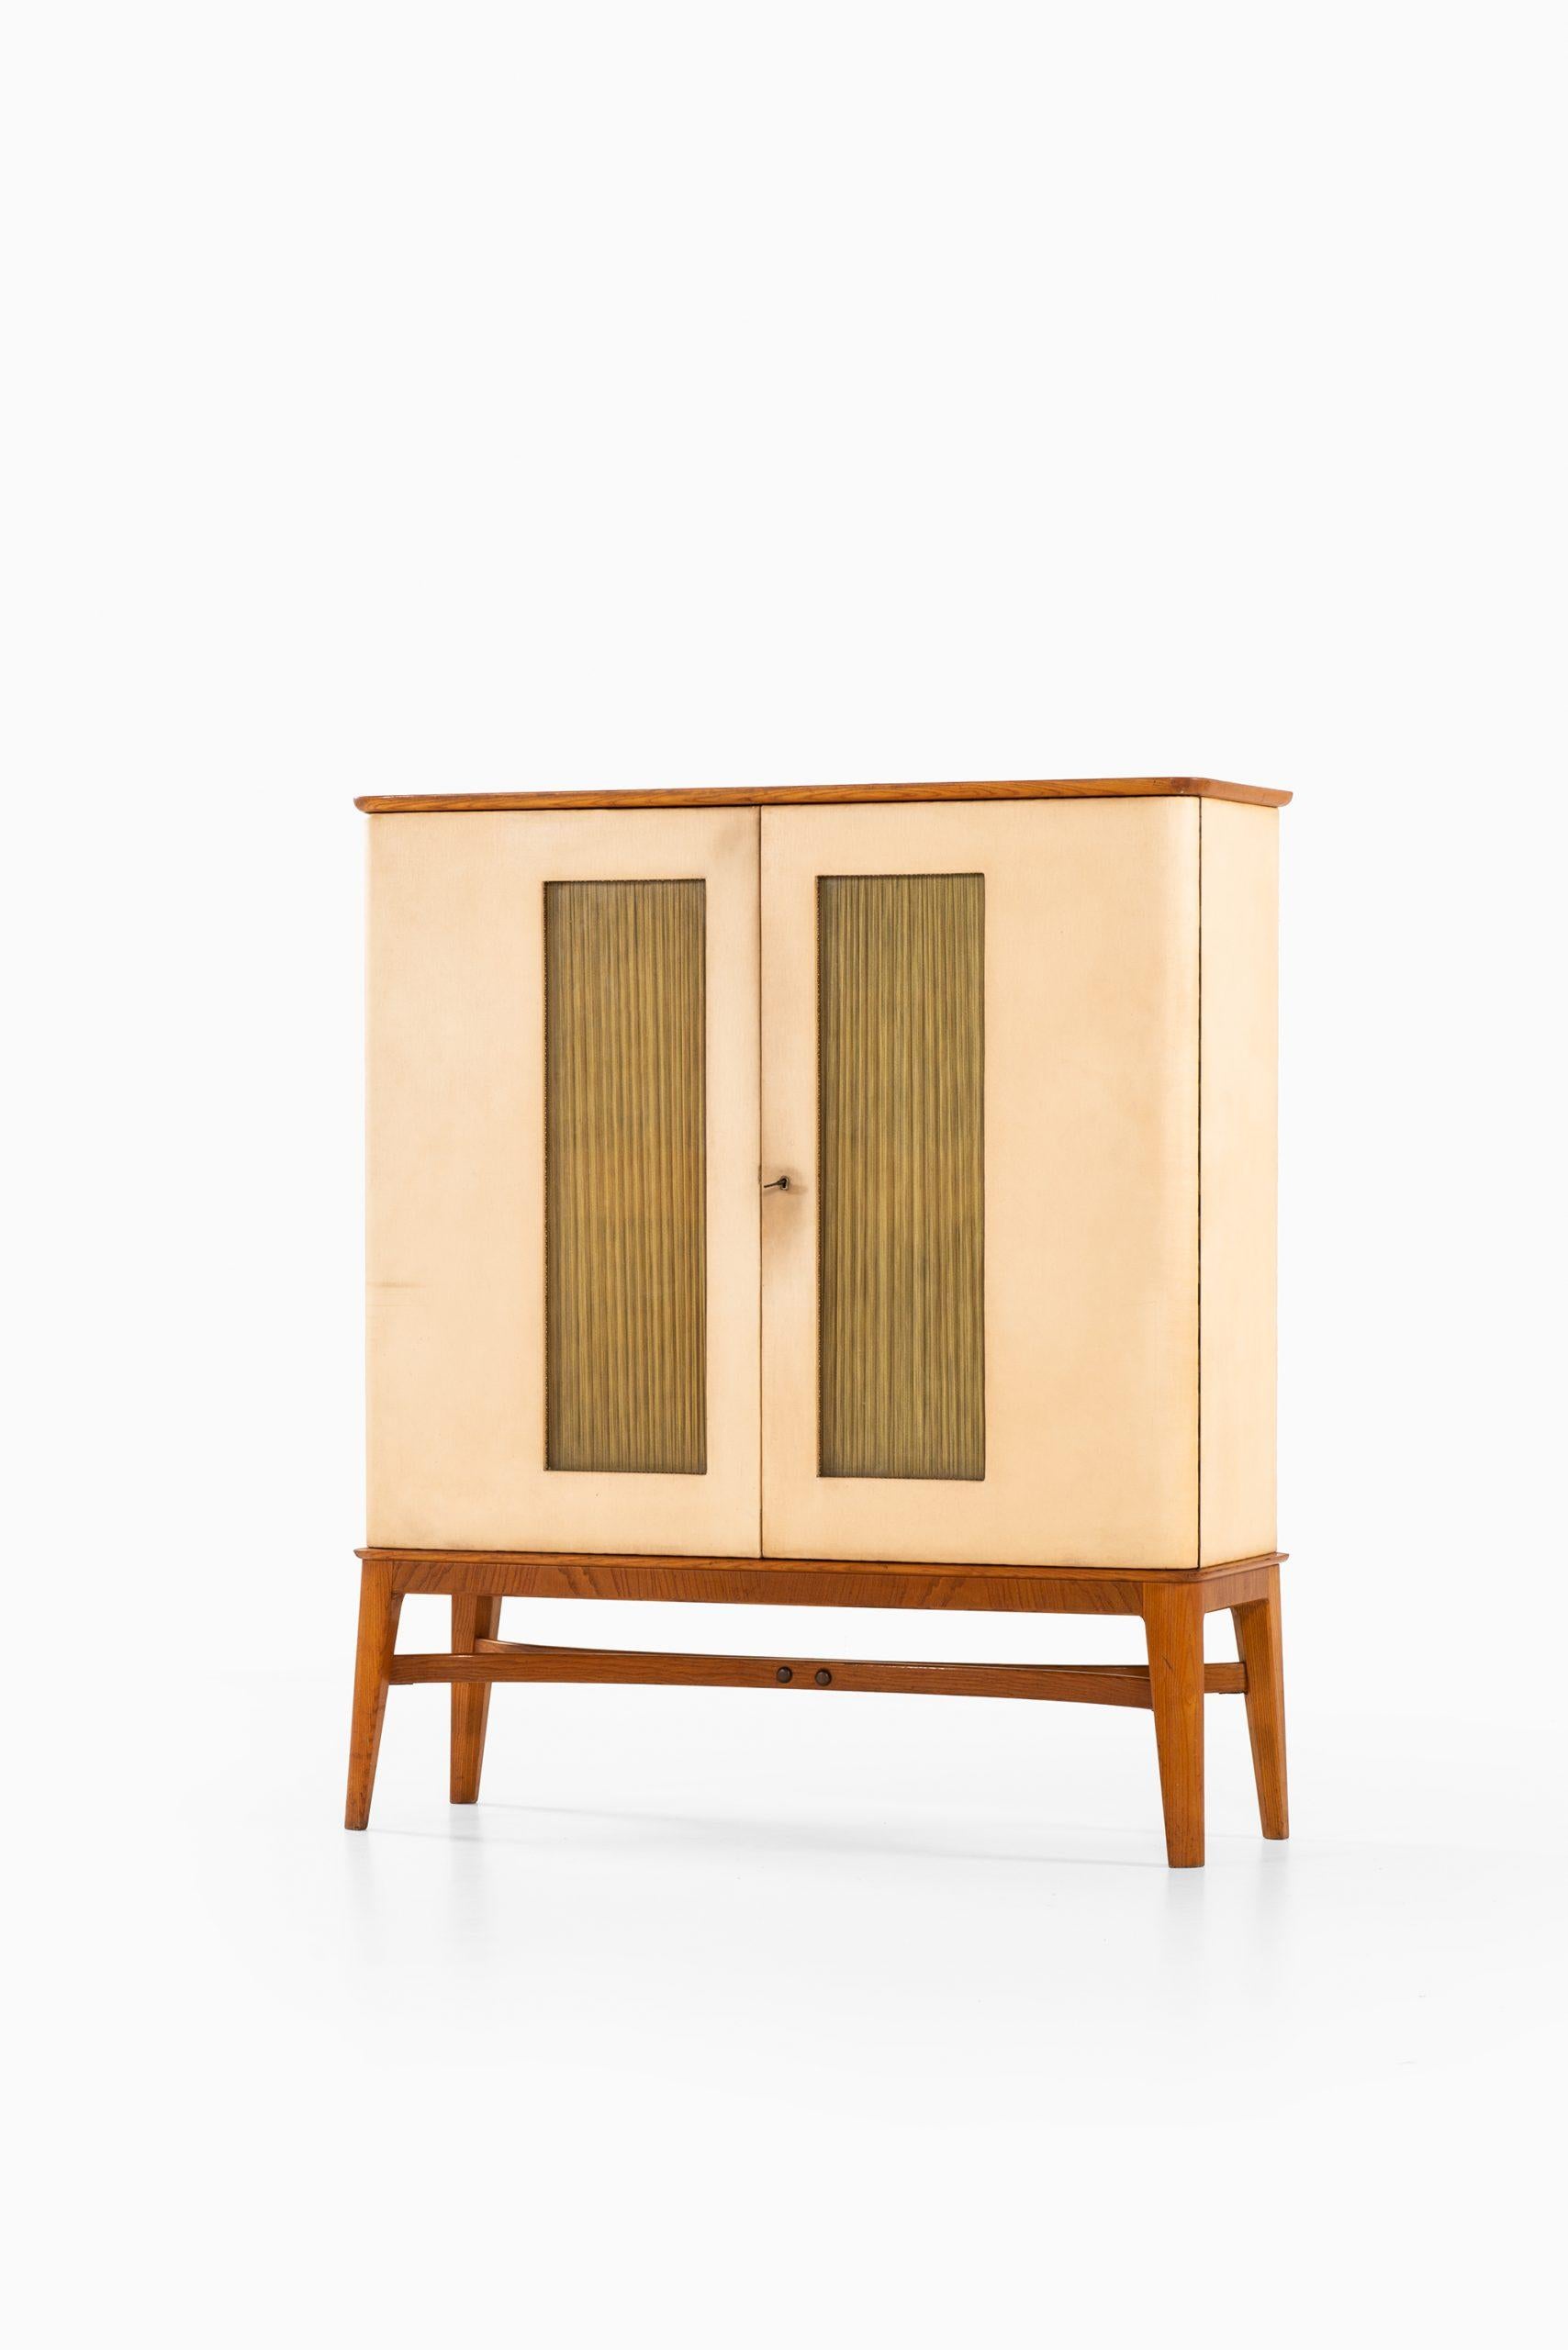 Very rare cabinet designed by Otto Schulz. Produced by Boet in Sweden.